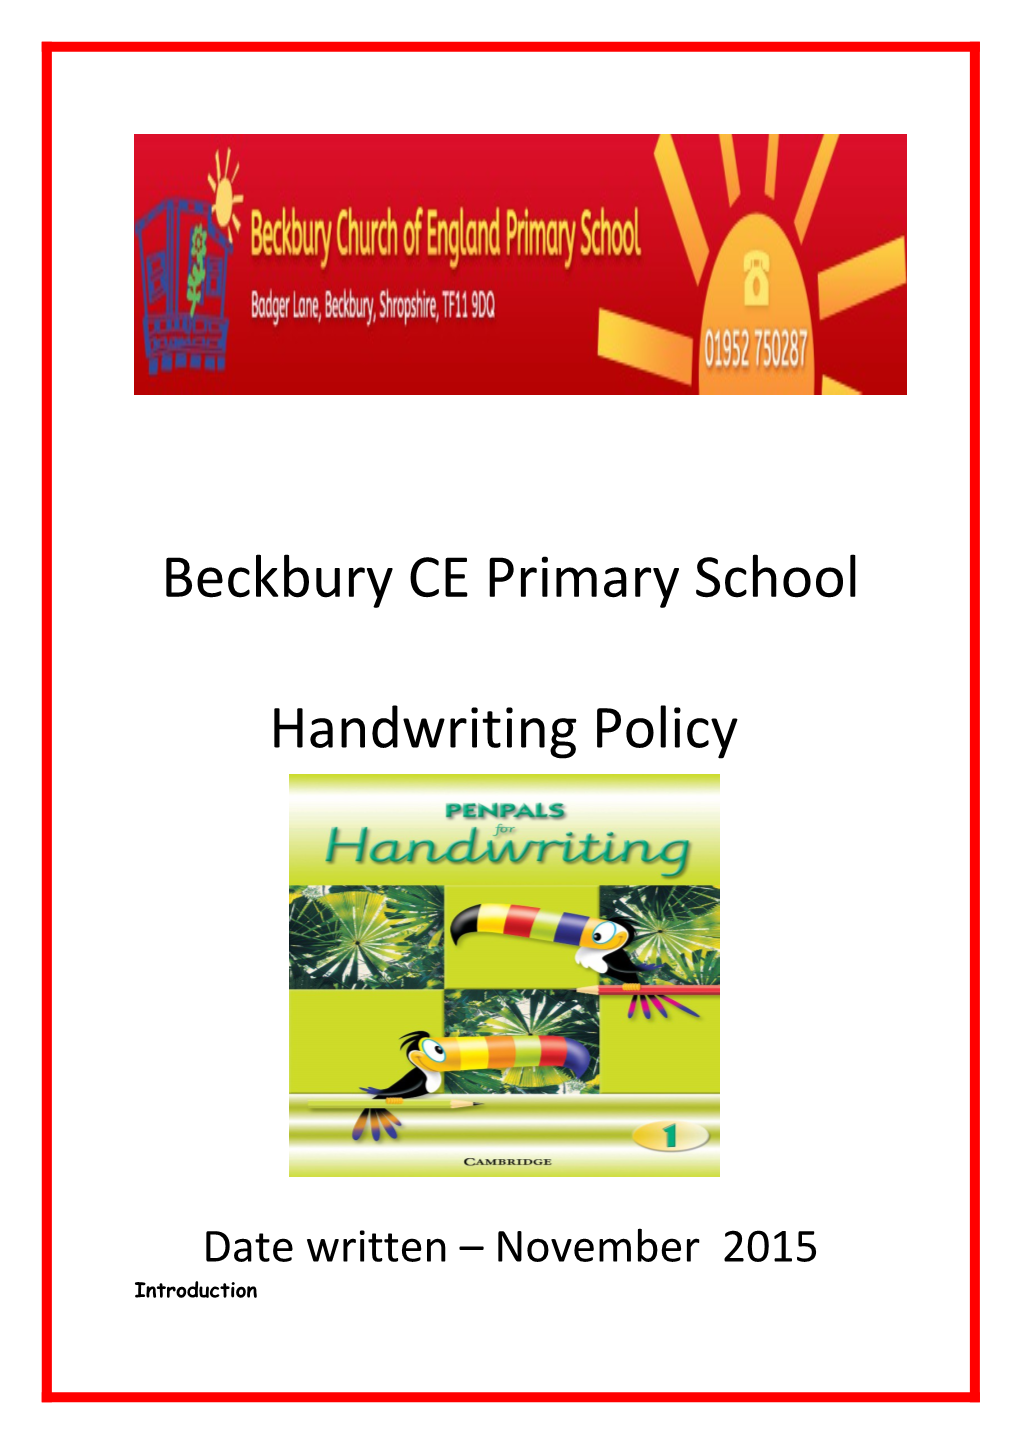 This Policy Is to Outline How We Do Hand Writing at Beckbury CE Primary School